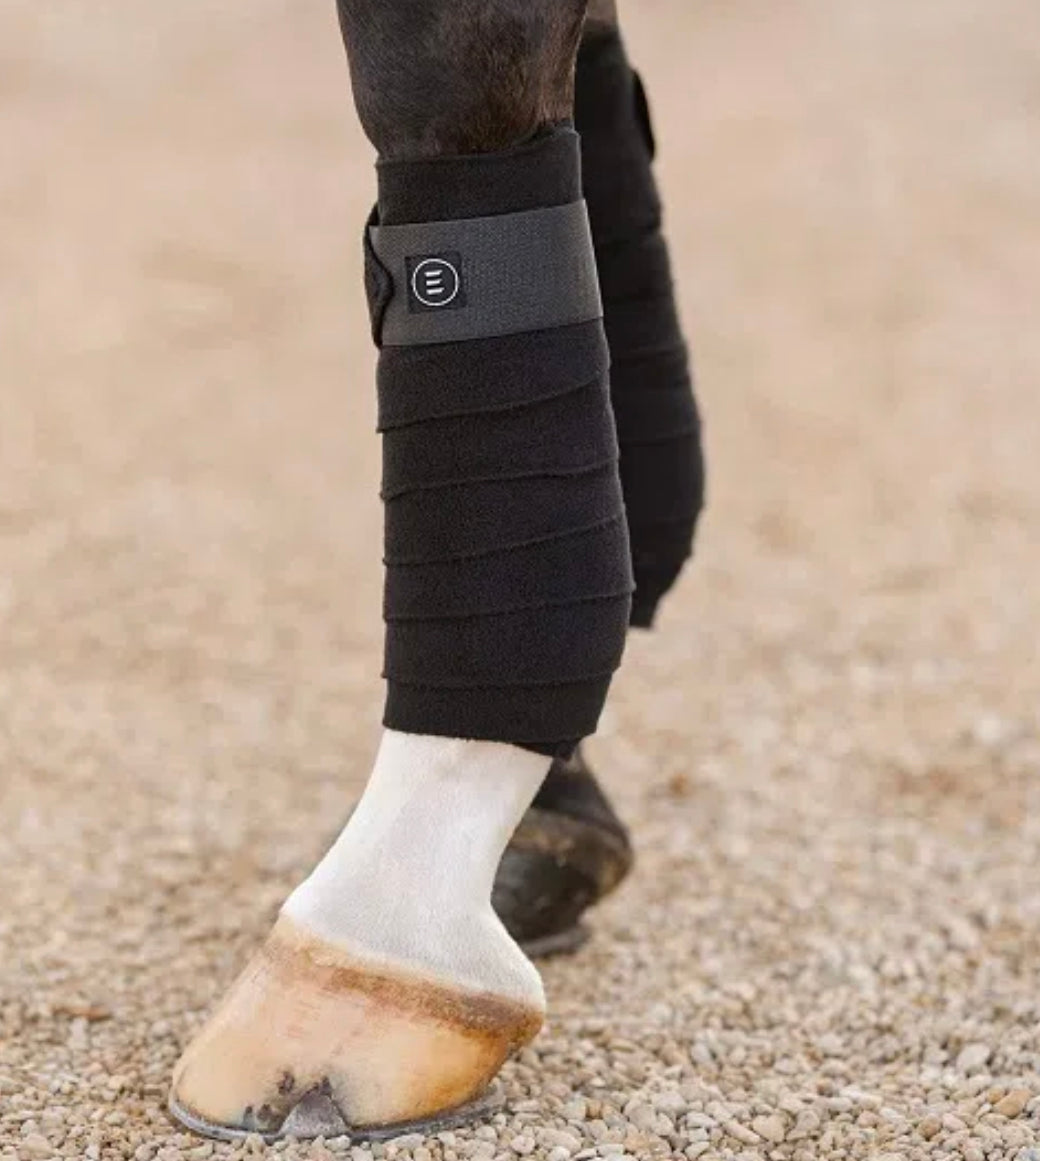 EquiFit Essential Polo Wraps